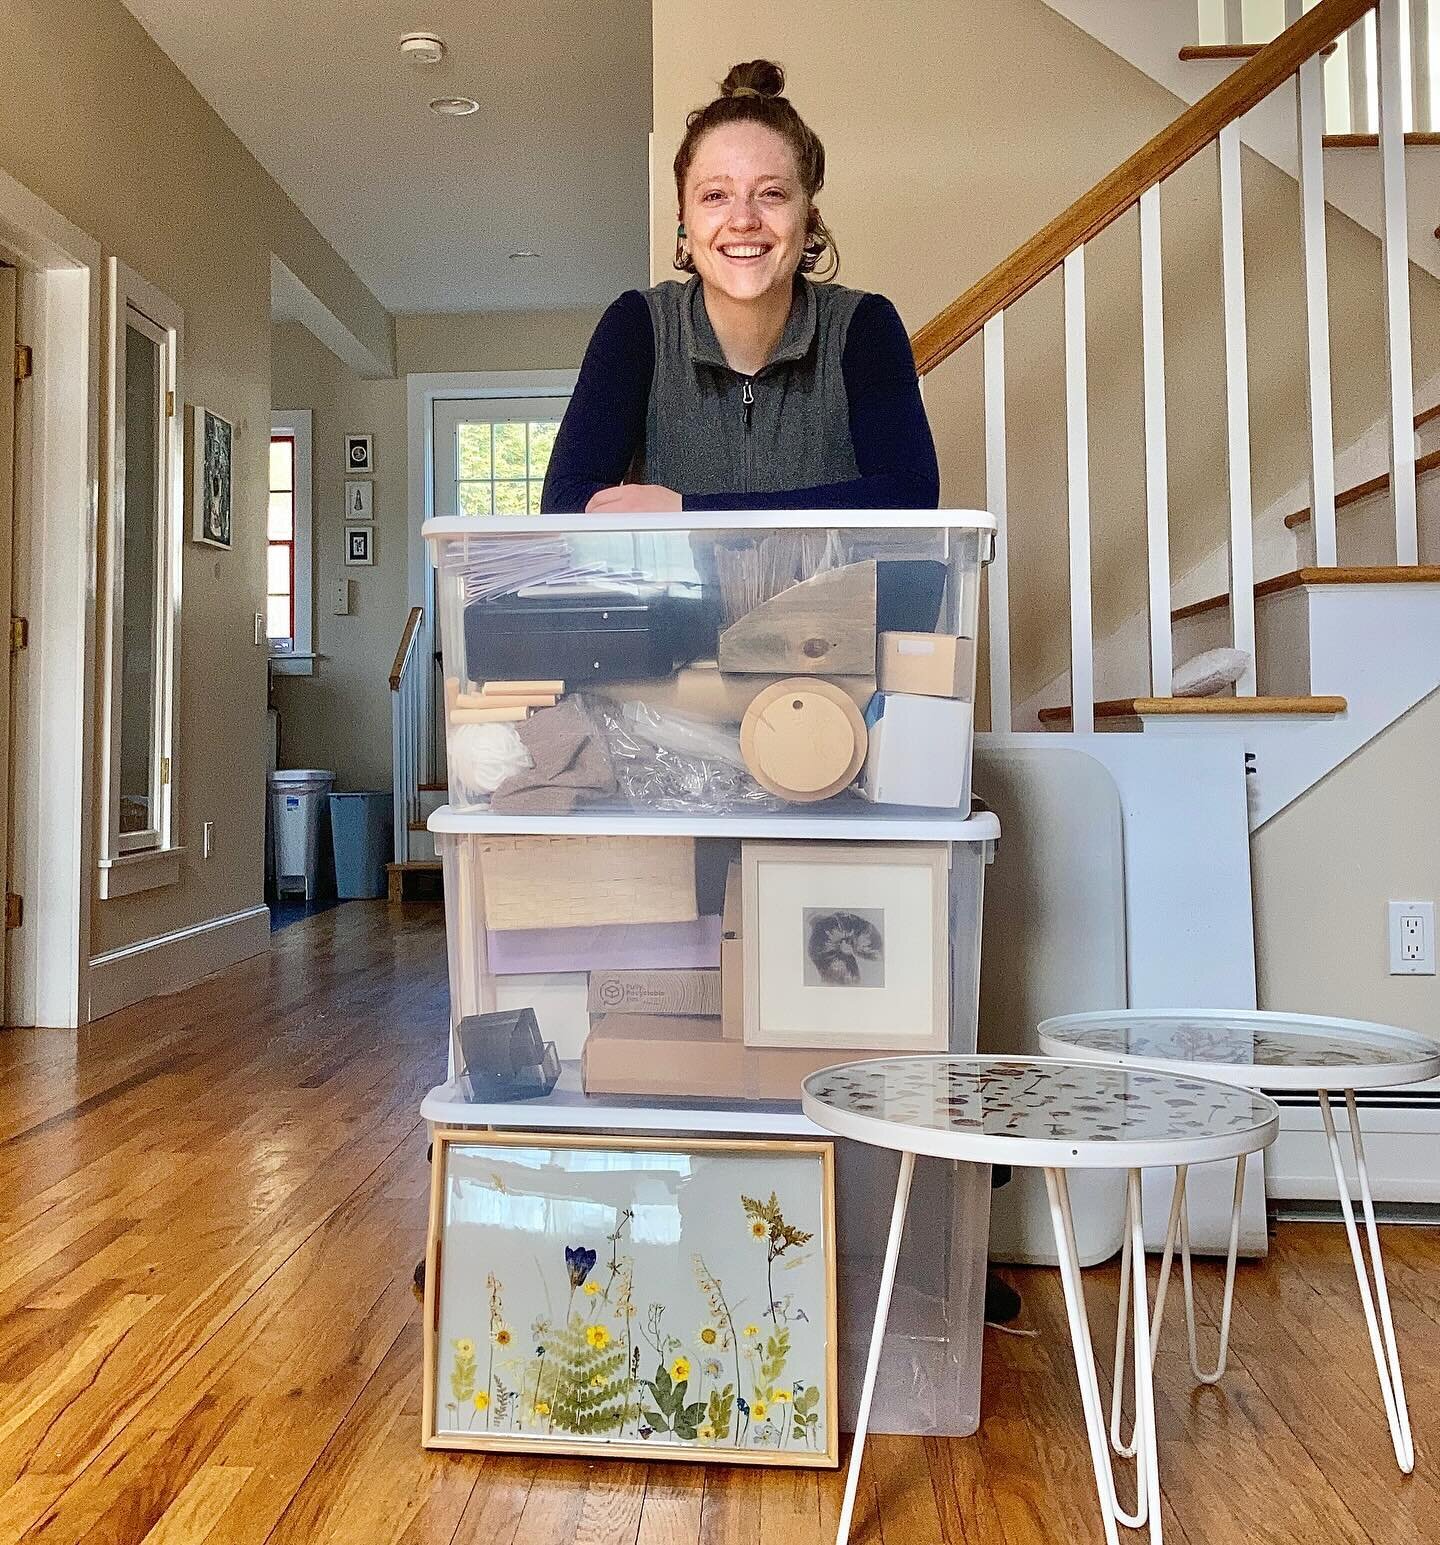 All packed up for @berkgrown this Saturday from 10 AM - 2 PM at the Housy Dome in Housatonic, MA&mdash;come on by! 

This will be the first place I&rsquo;ll be selling my new fruit &amp; veg jewelry, coasters, and keychains! I&rsquo;ll also have natu